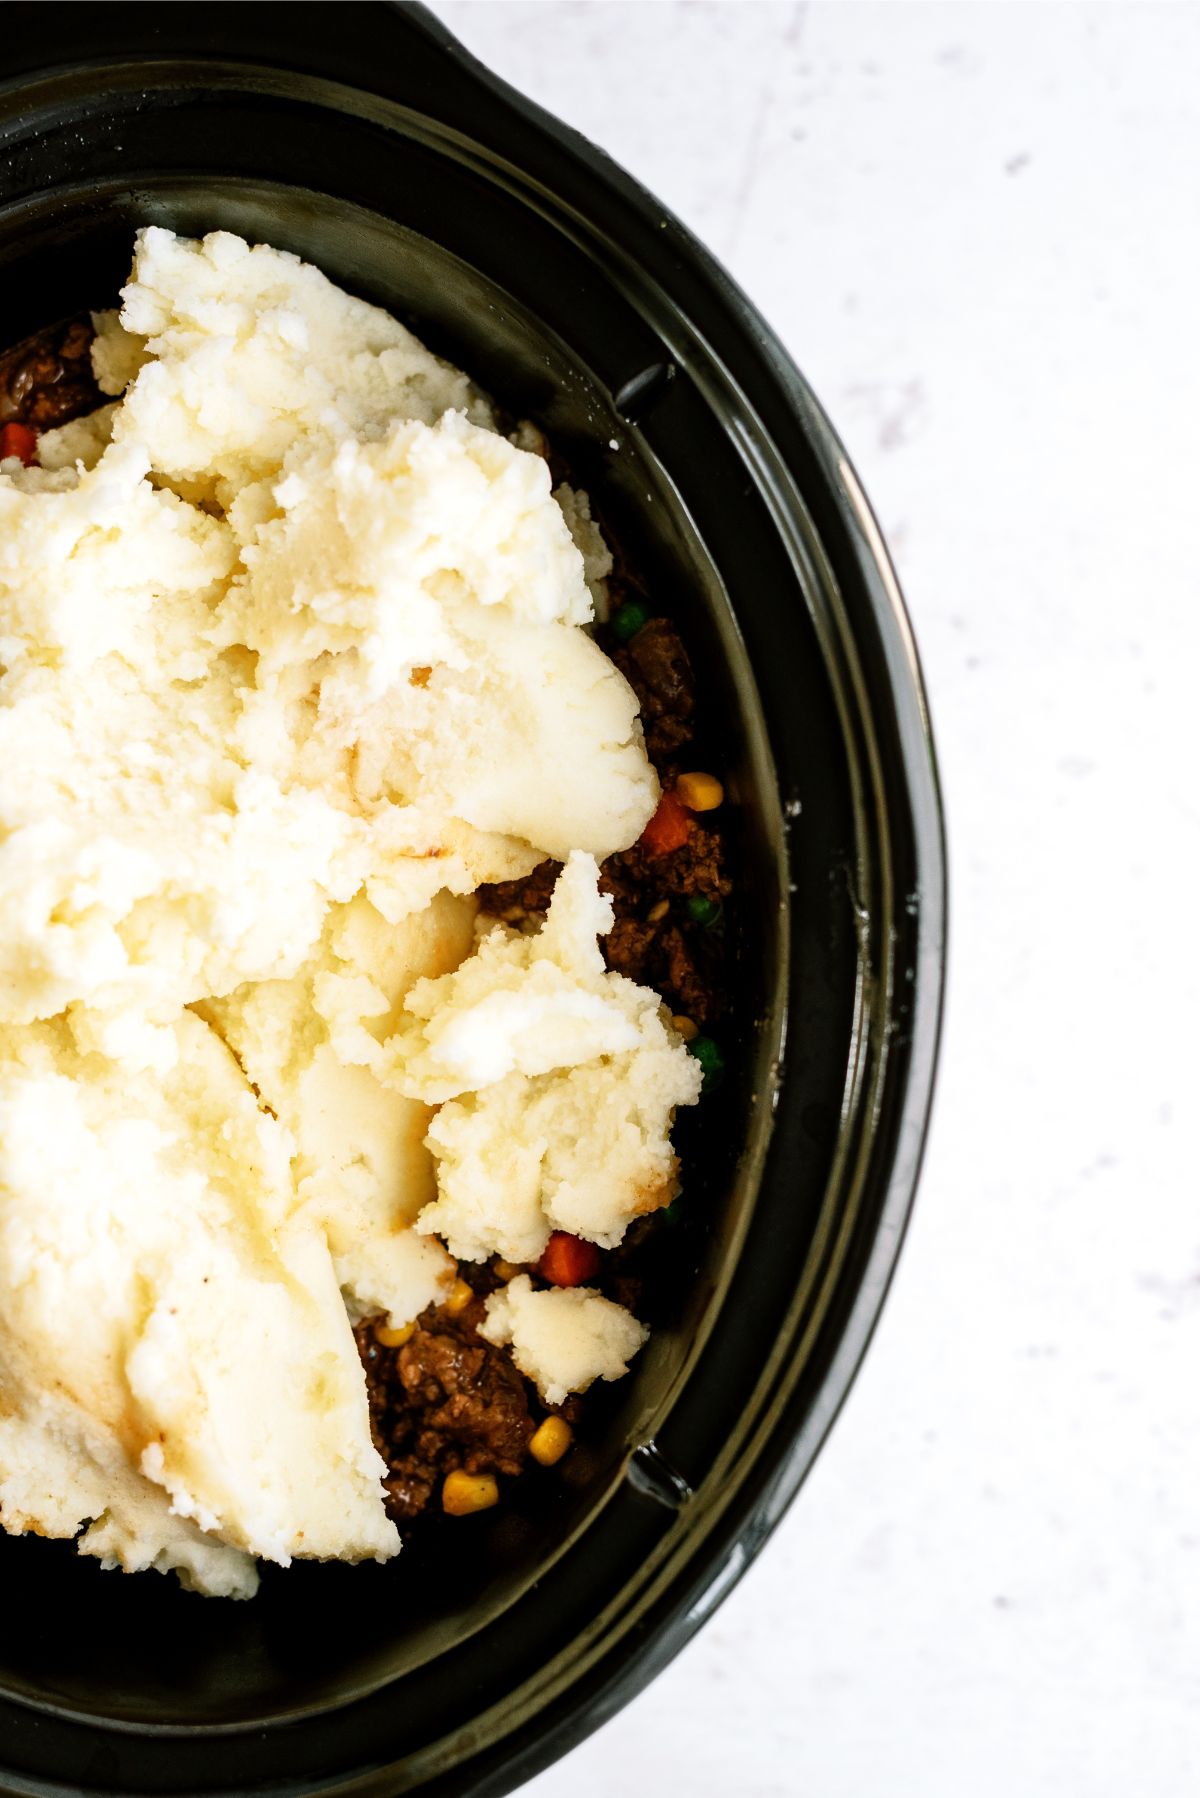 Prepared mashed potatoes on top of meat mixture in the slow cooker